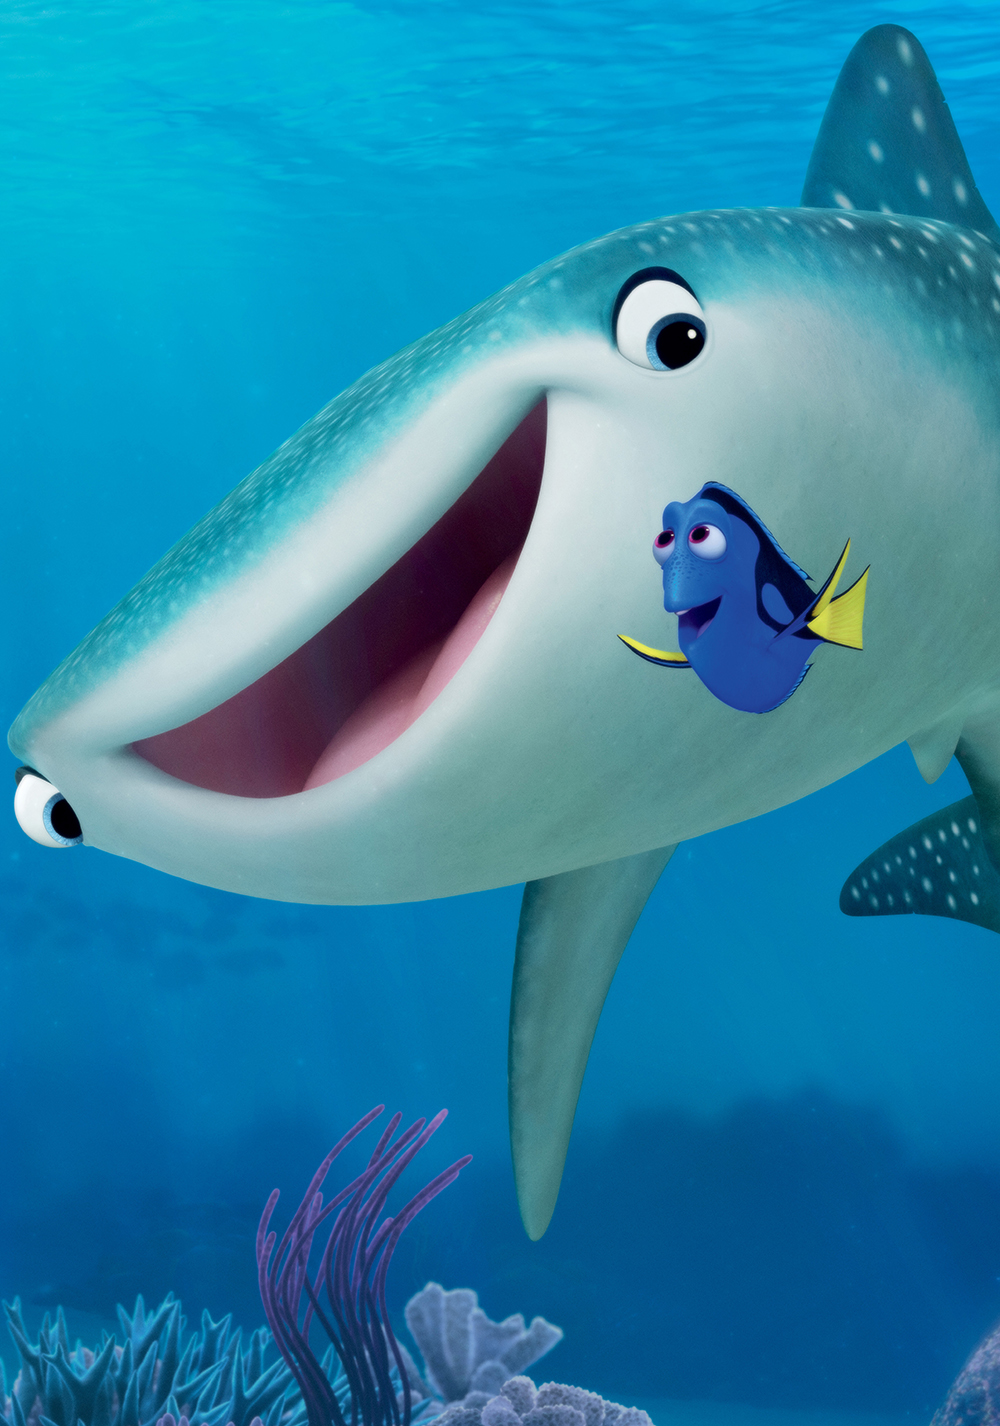 Finding Dory download the last version for windows